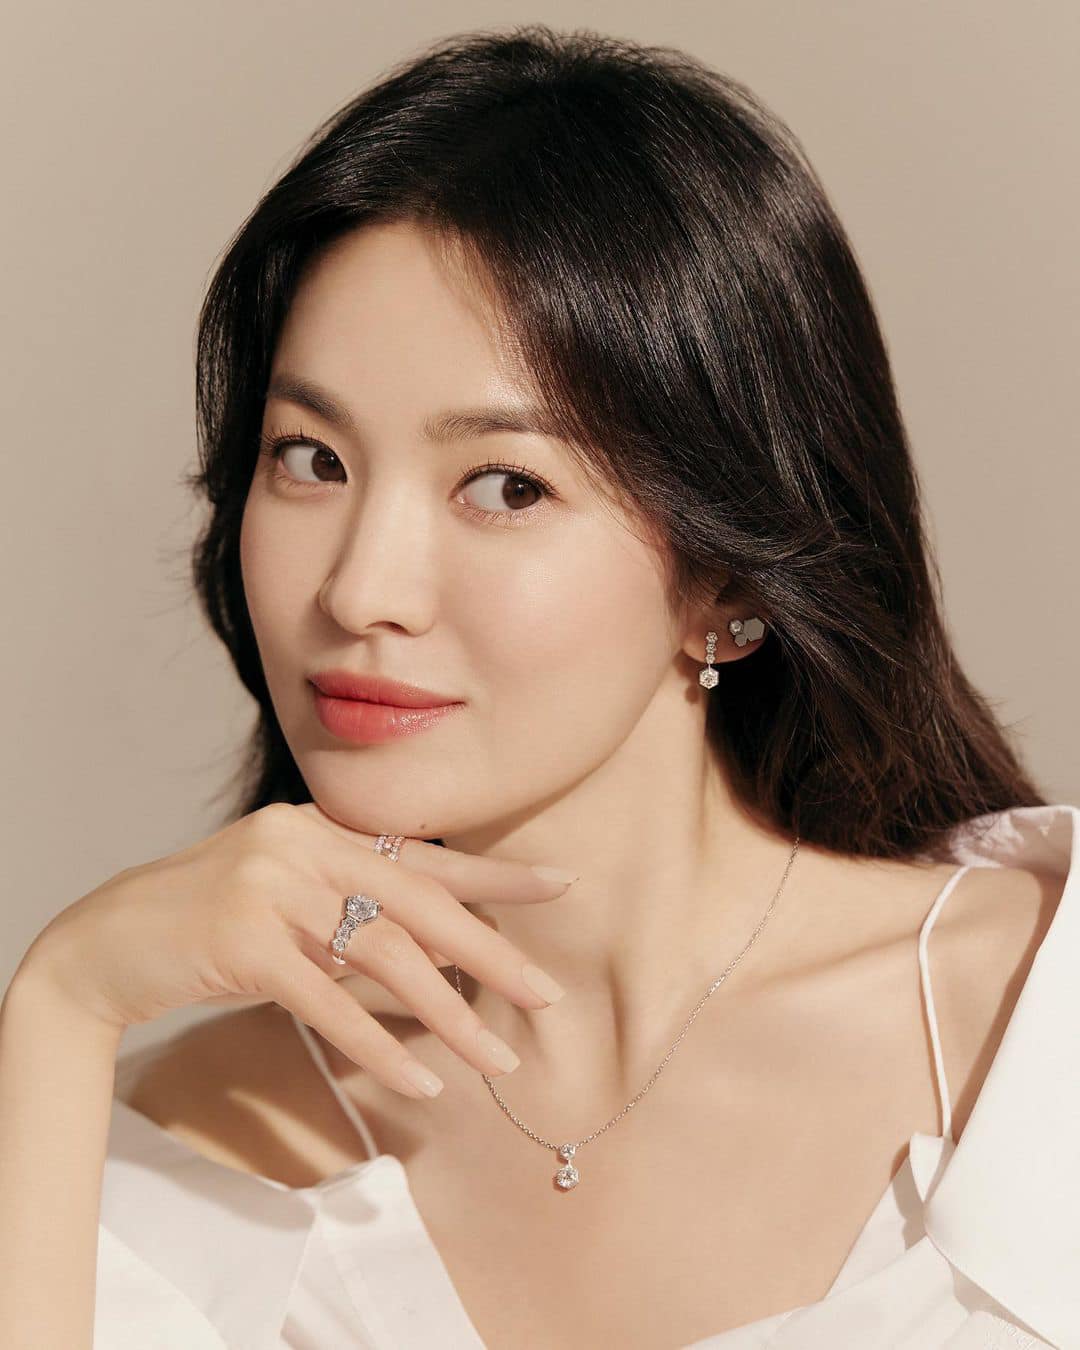 Song Hye Kyo rarely wears revealing clothes, but everyone is surprised with this masterpiece - Photo 11.